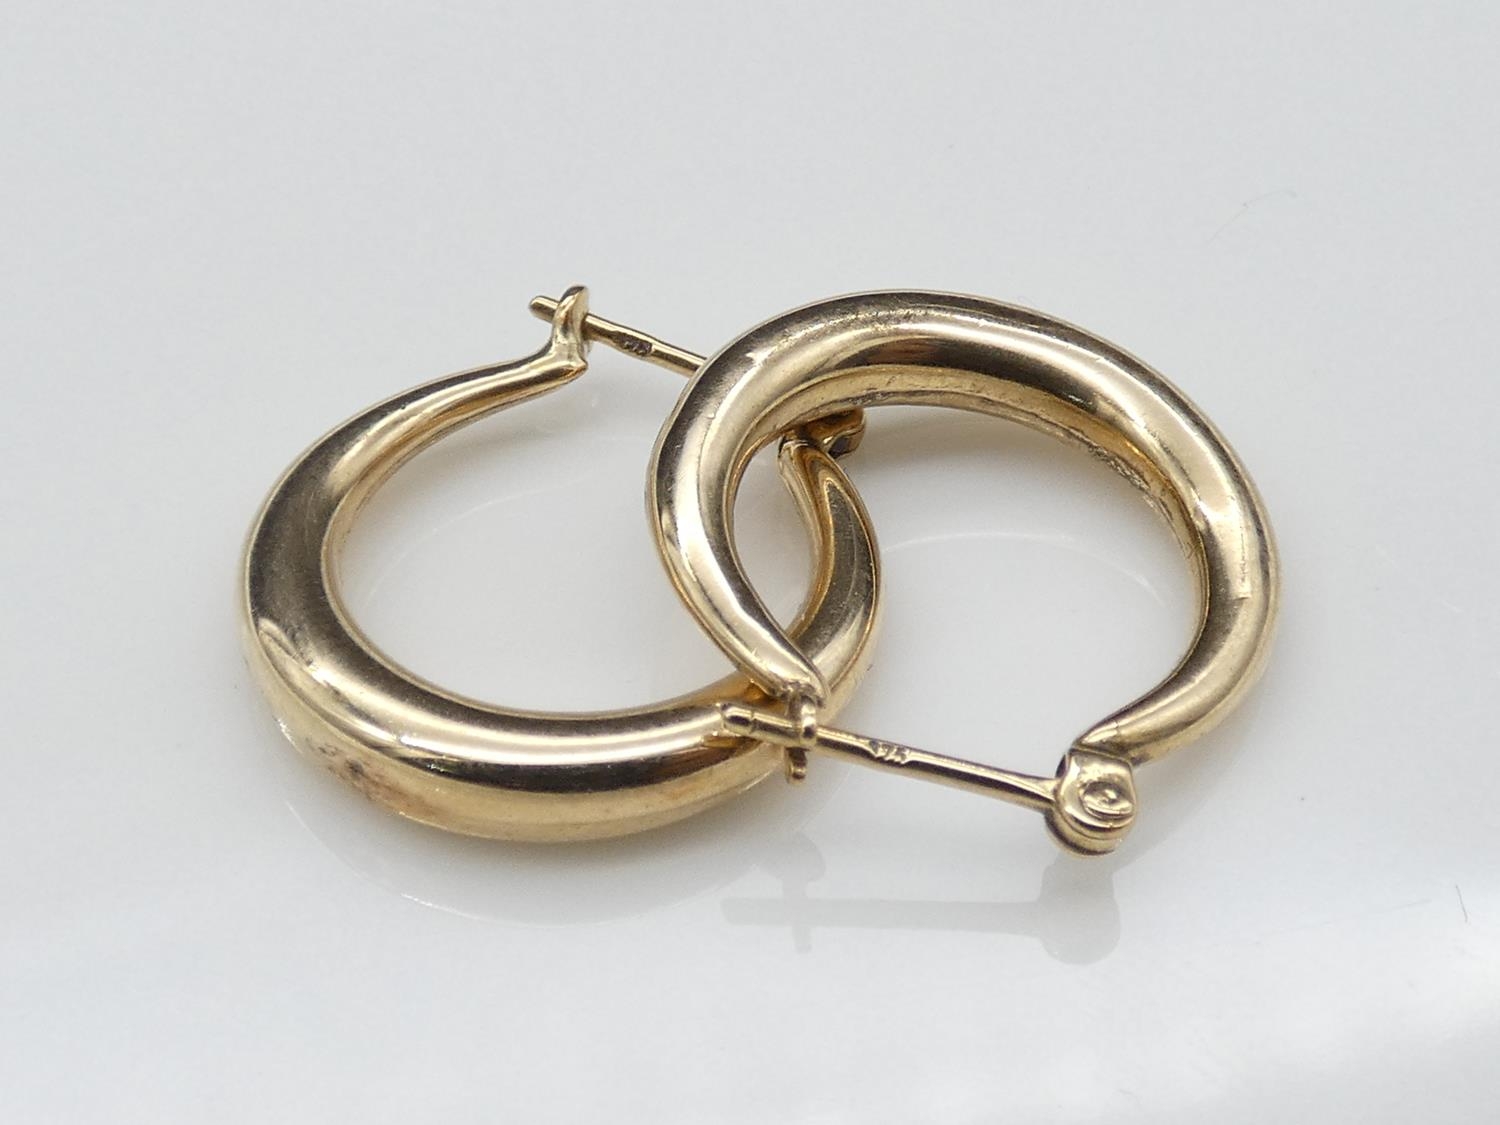 A pair of 9ct yellow gold hollow hoop earrings with secure bar fittings. Diameter 1.8cm.